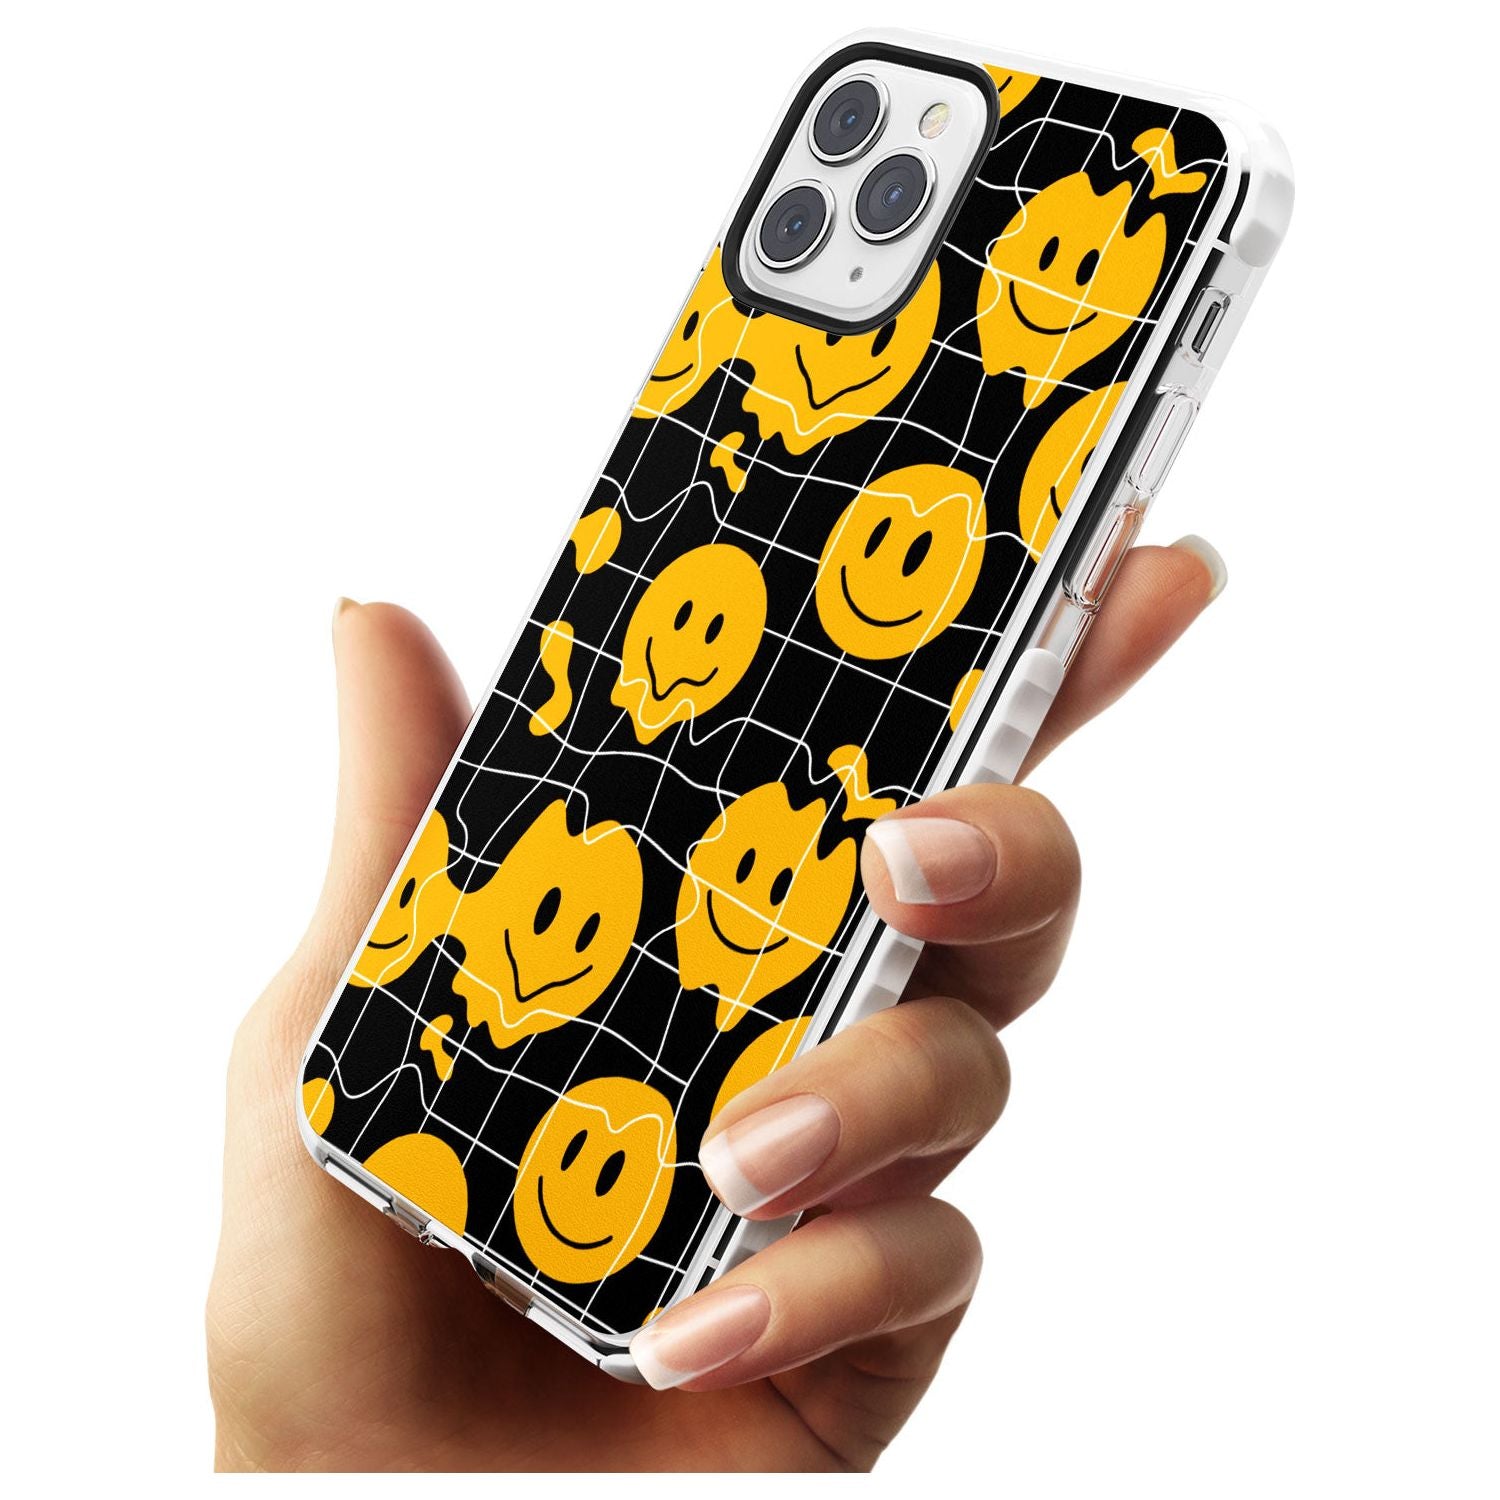 Acid Face Grid Pattern Impact Phone Case for iPhone 11 Pro Max